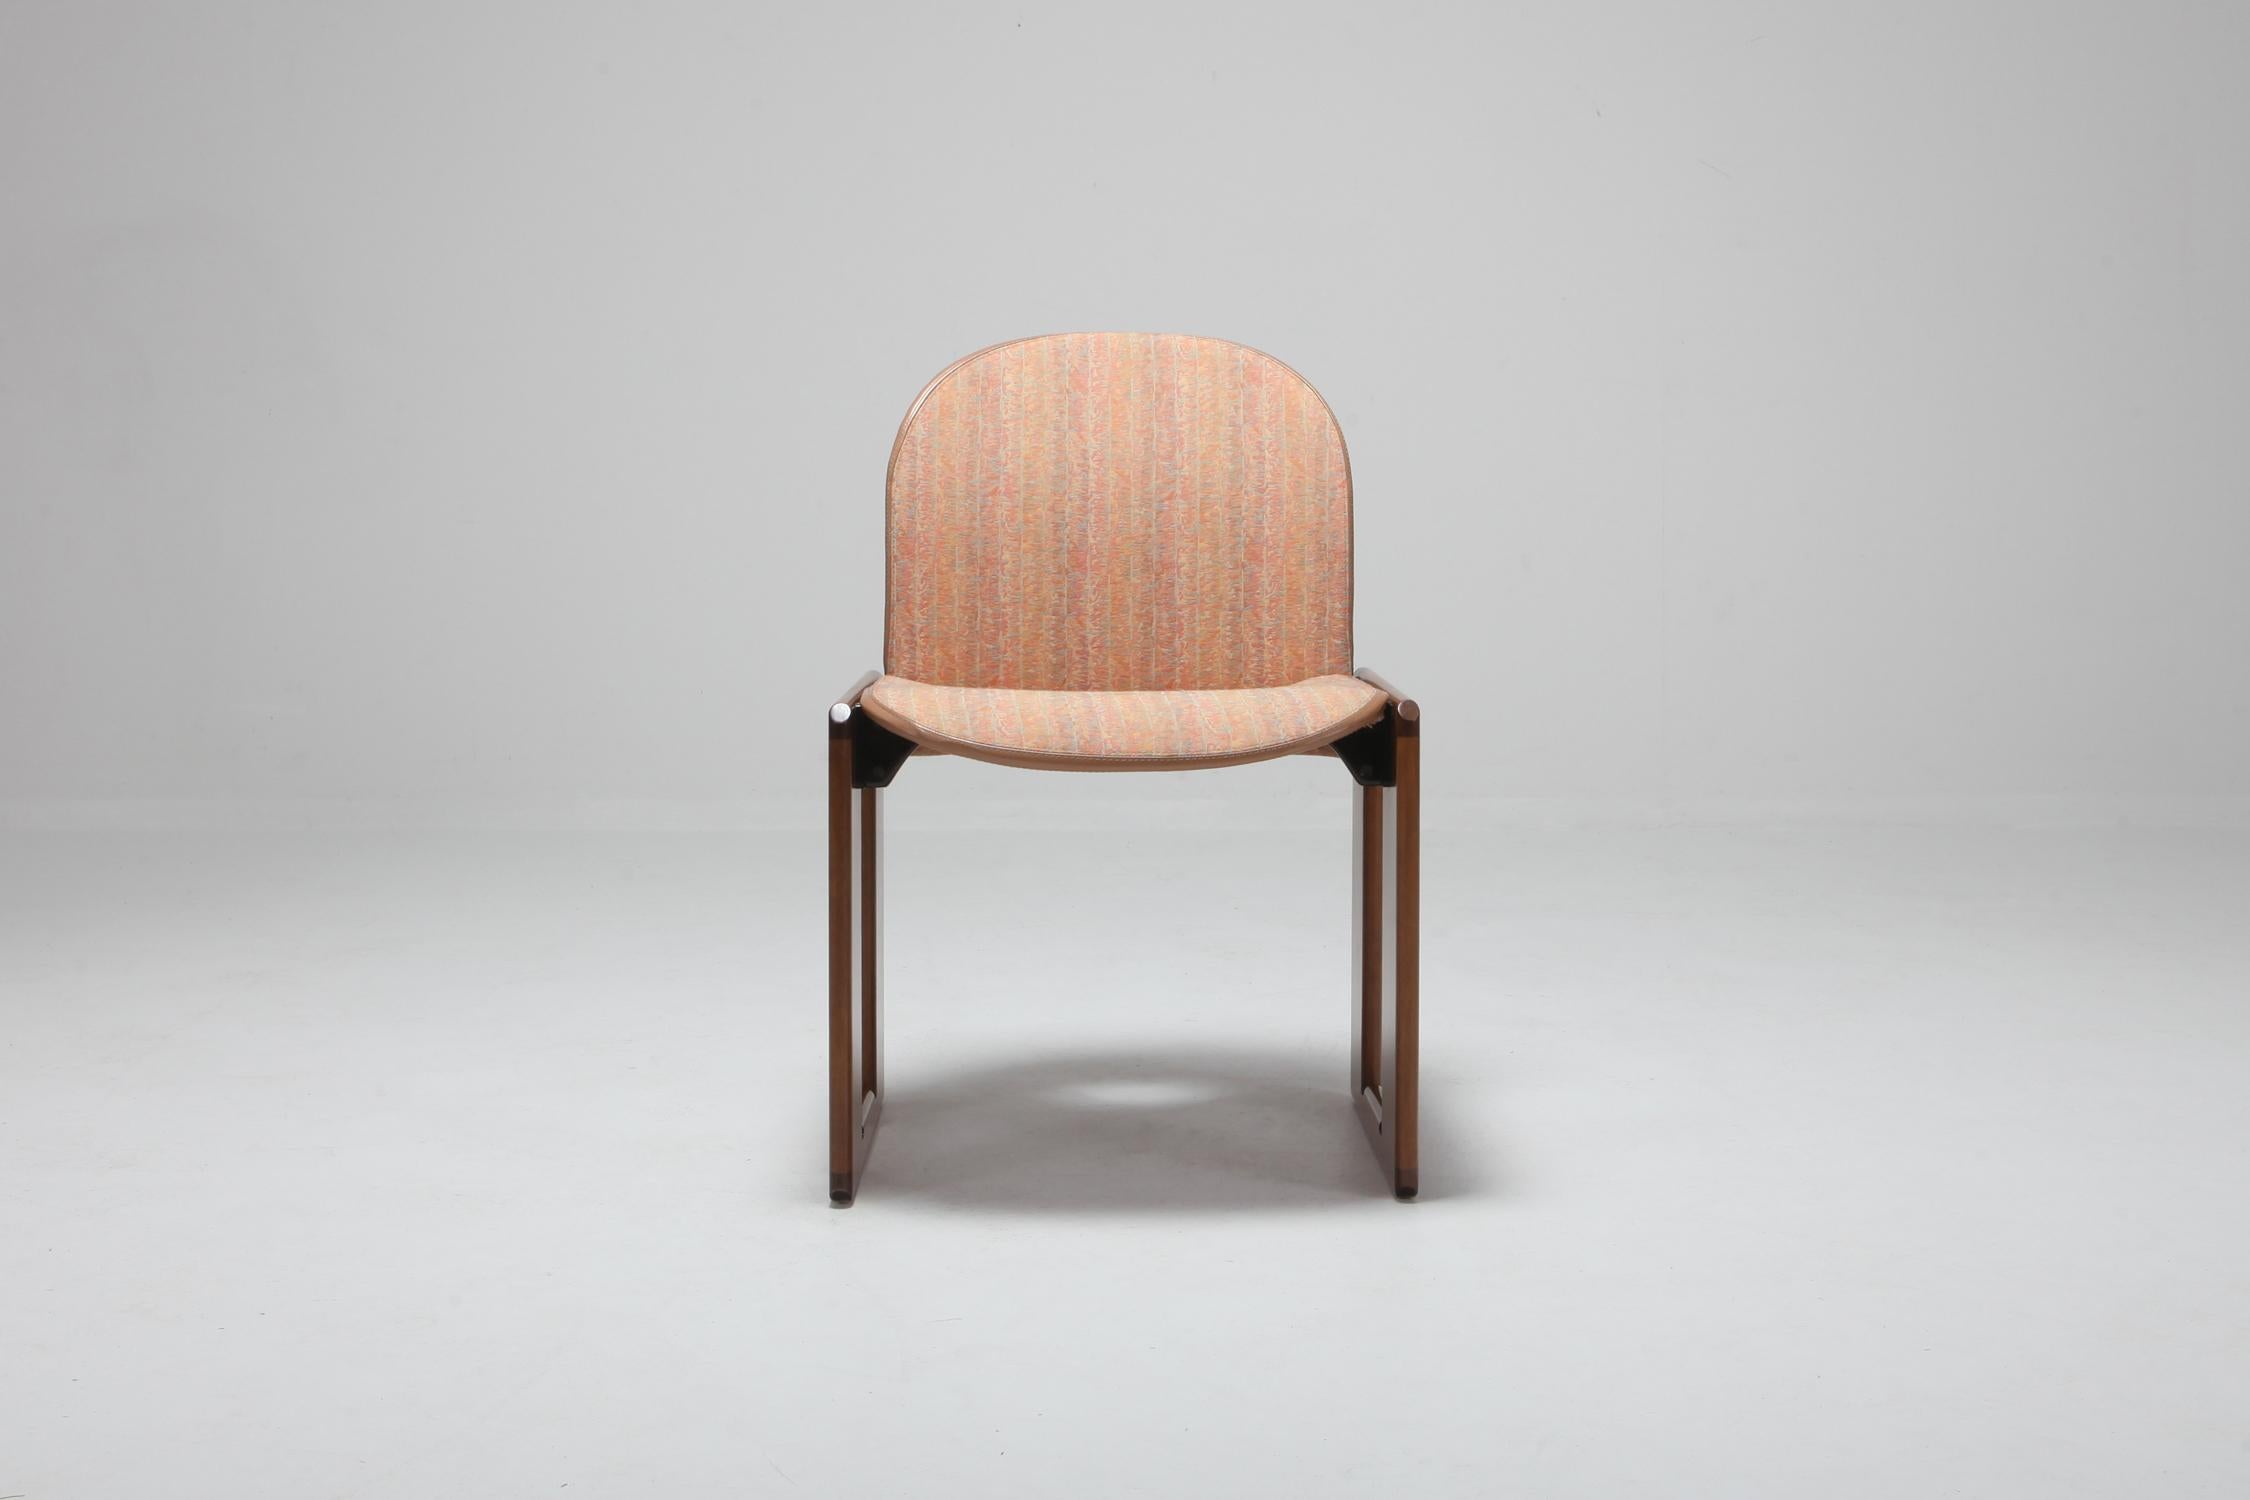 Afra & Tobia Scarpa chairs, Cassina, model 121, wood and walnut, Italy, 1965. 

Original upholstery in a Postmodern coral patterned wool with leather trimming.
If this doesn't suit your taste we can have these reupholstered in our professional